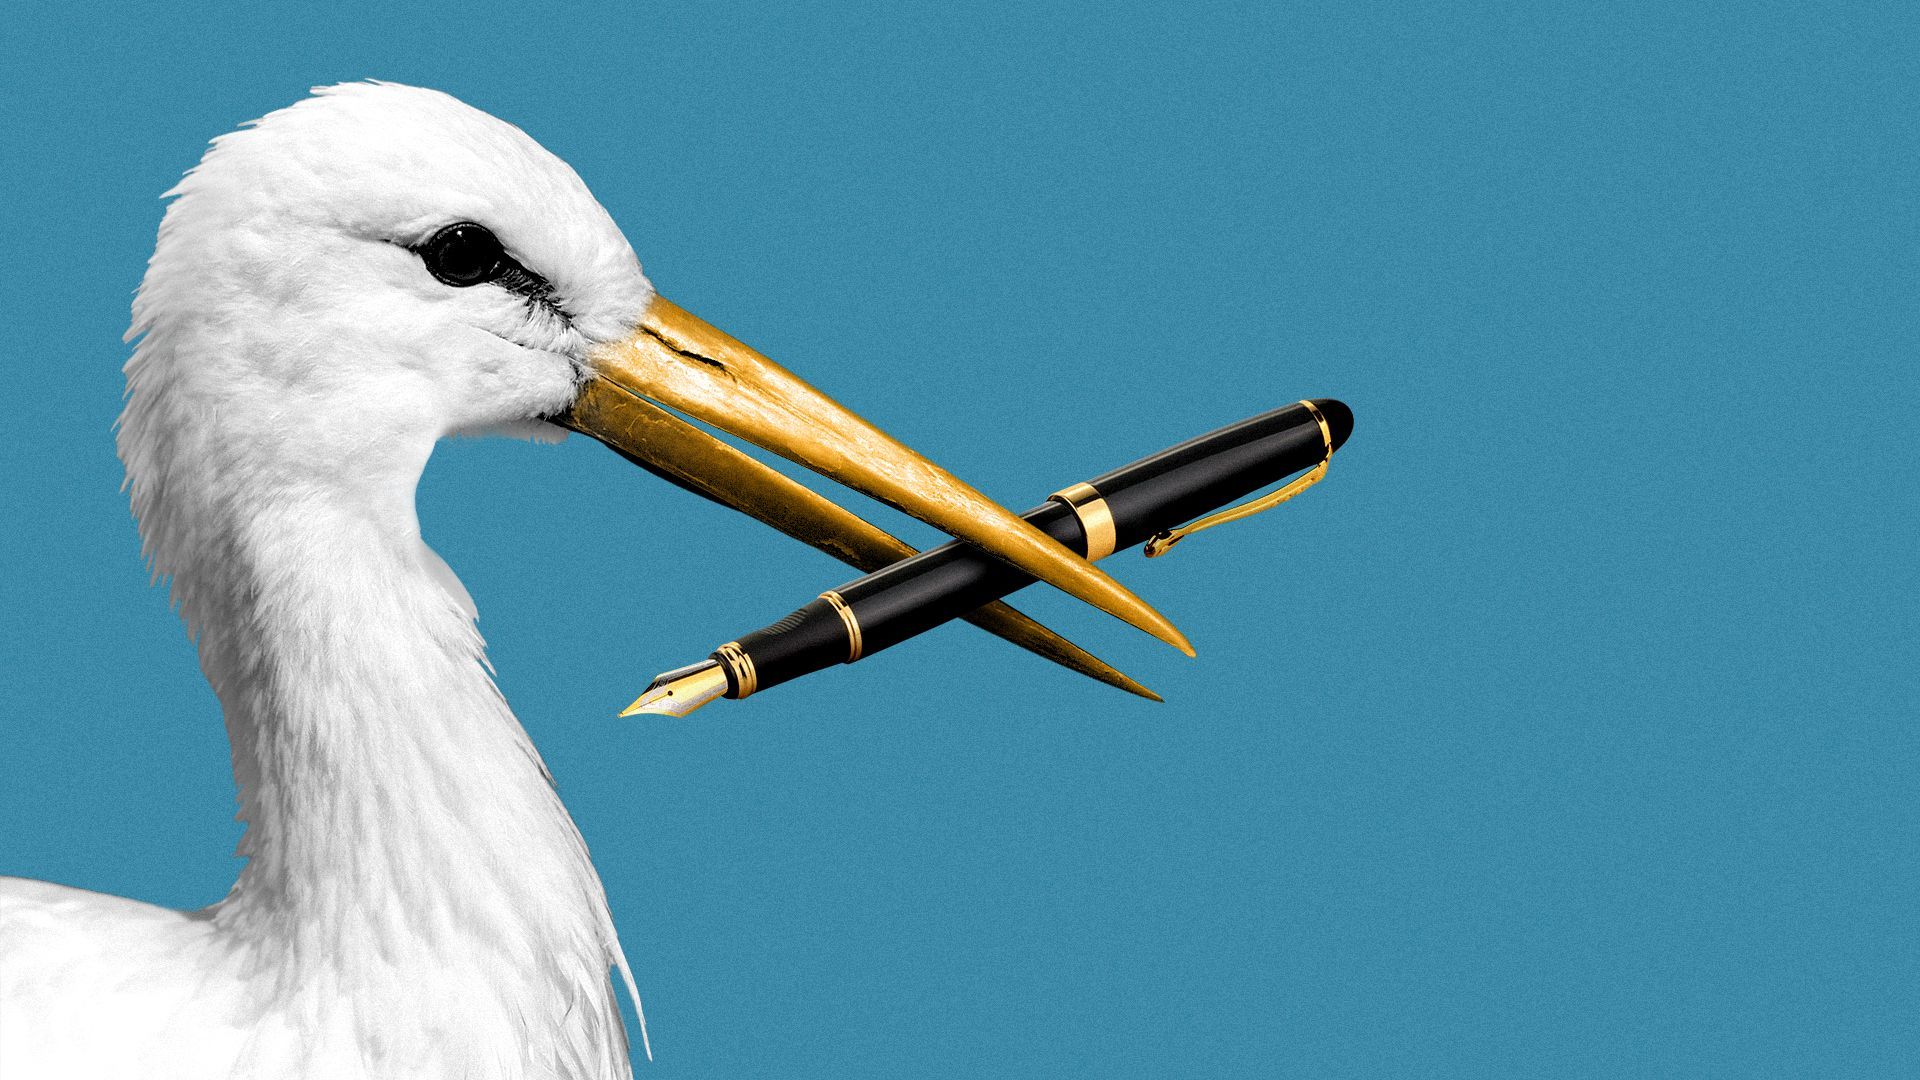 Illustration of a stork holding a fountain pen in its beak.